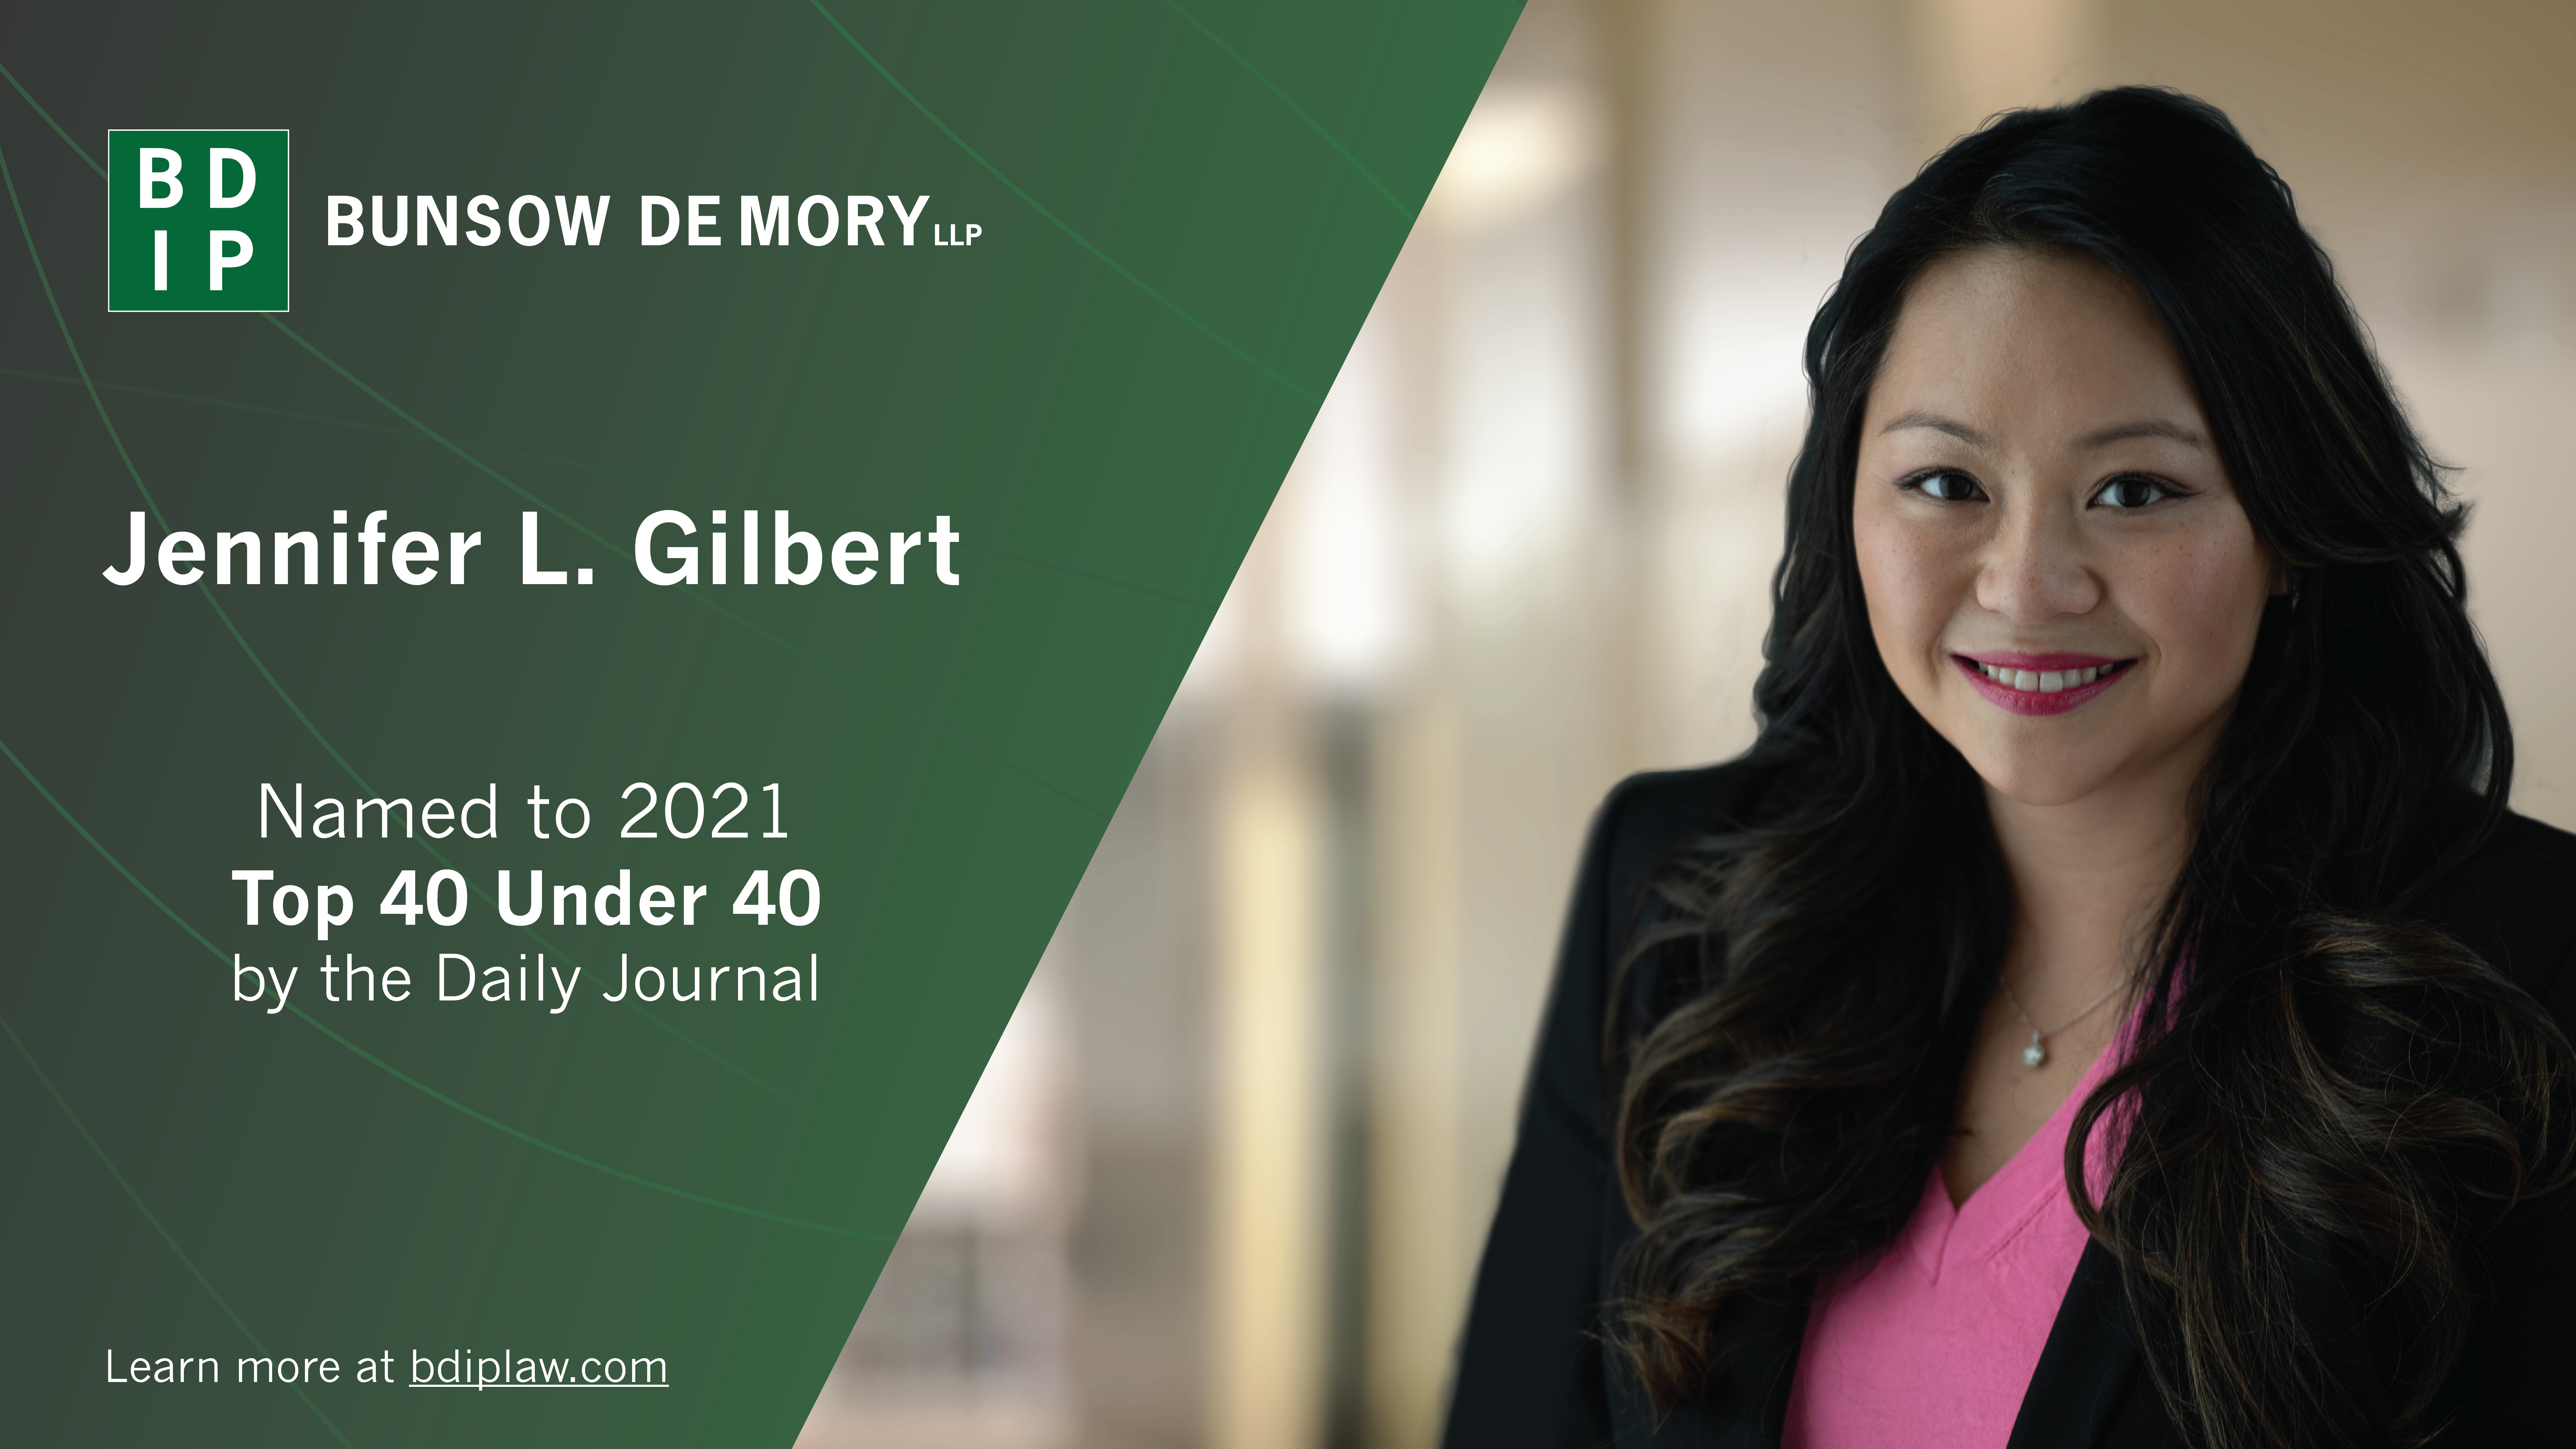 Jennifer L. Gilbert Named to 2021 Top 40 Under 40 by the Daily Journal